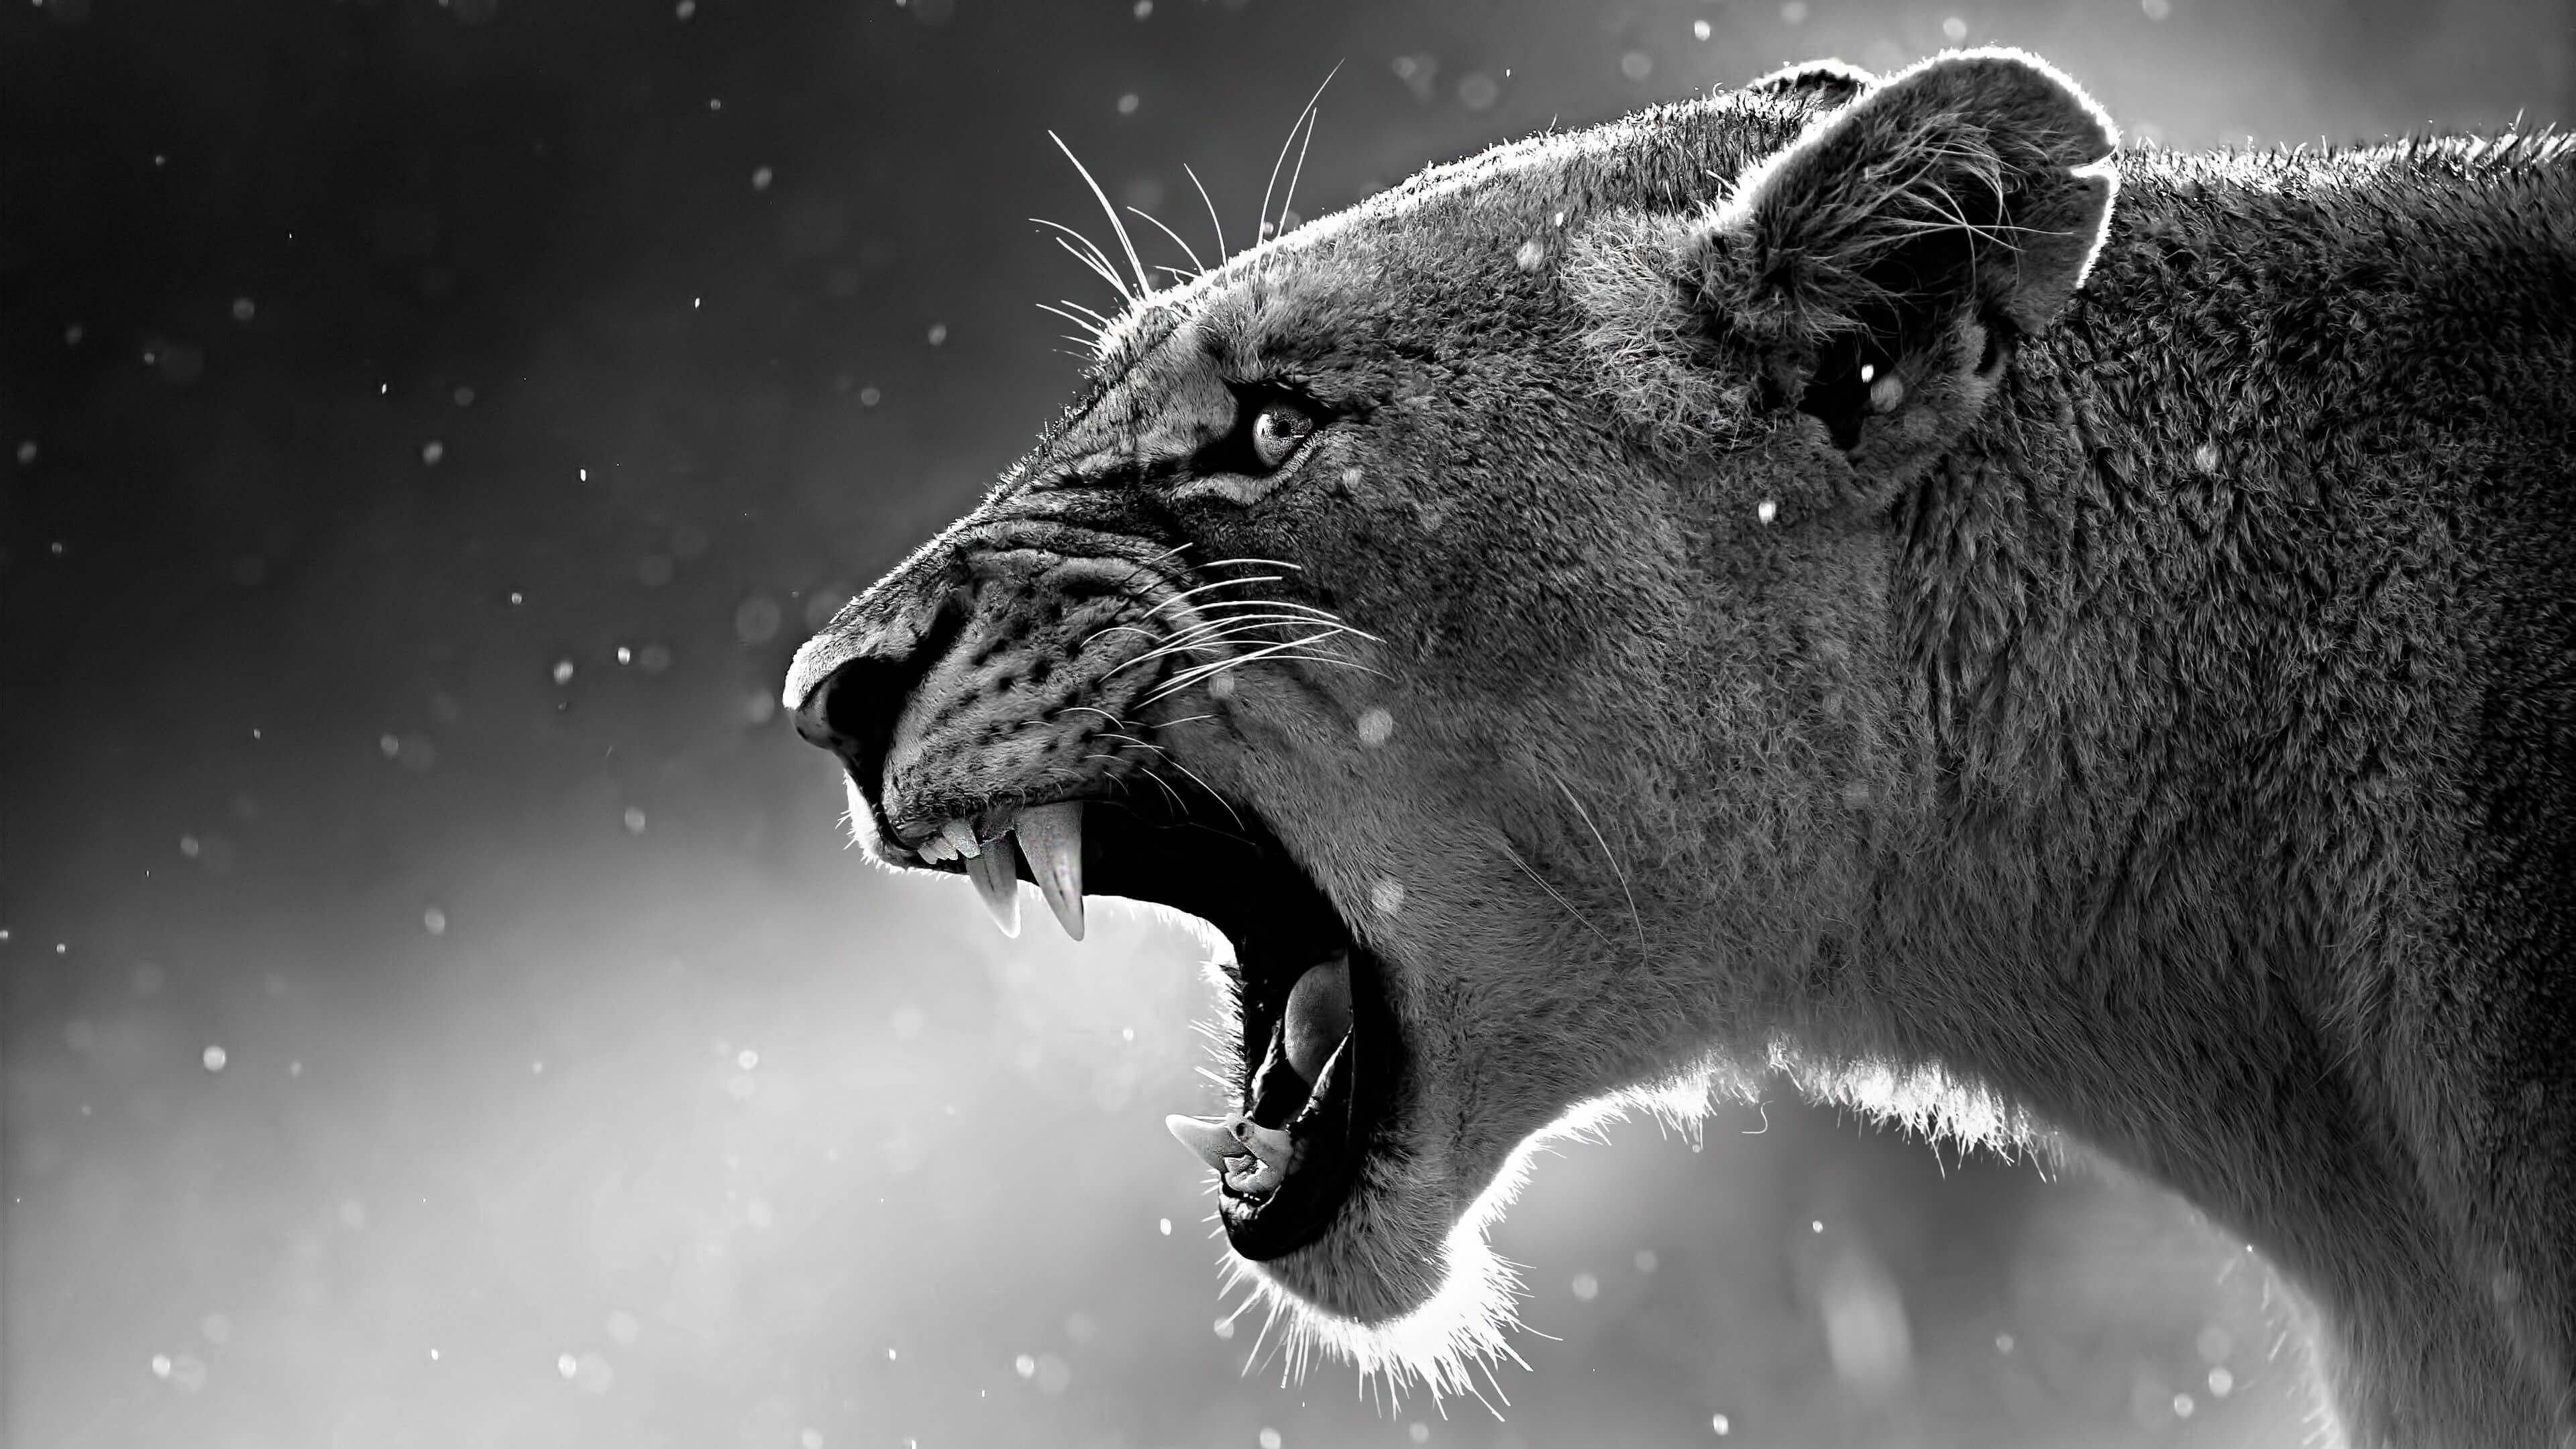 Lioness In Black And White Wallpaper For 4k Desktop HD Background